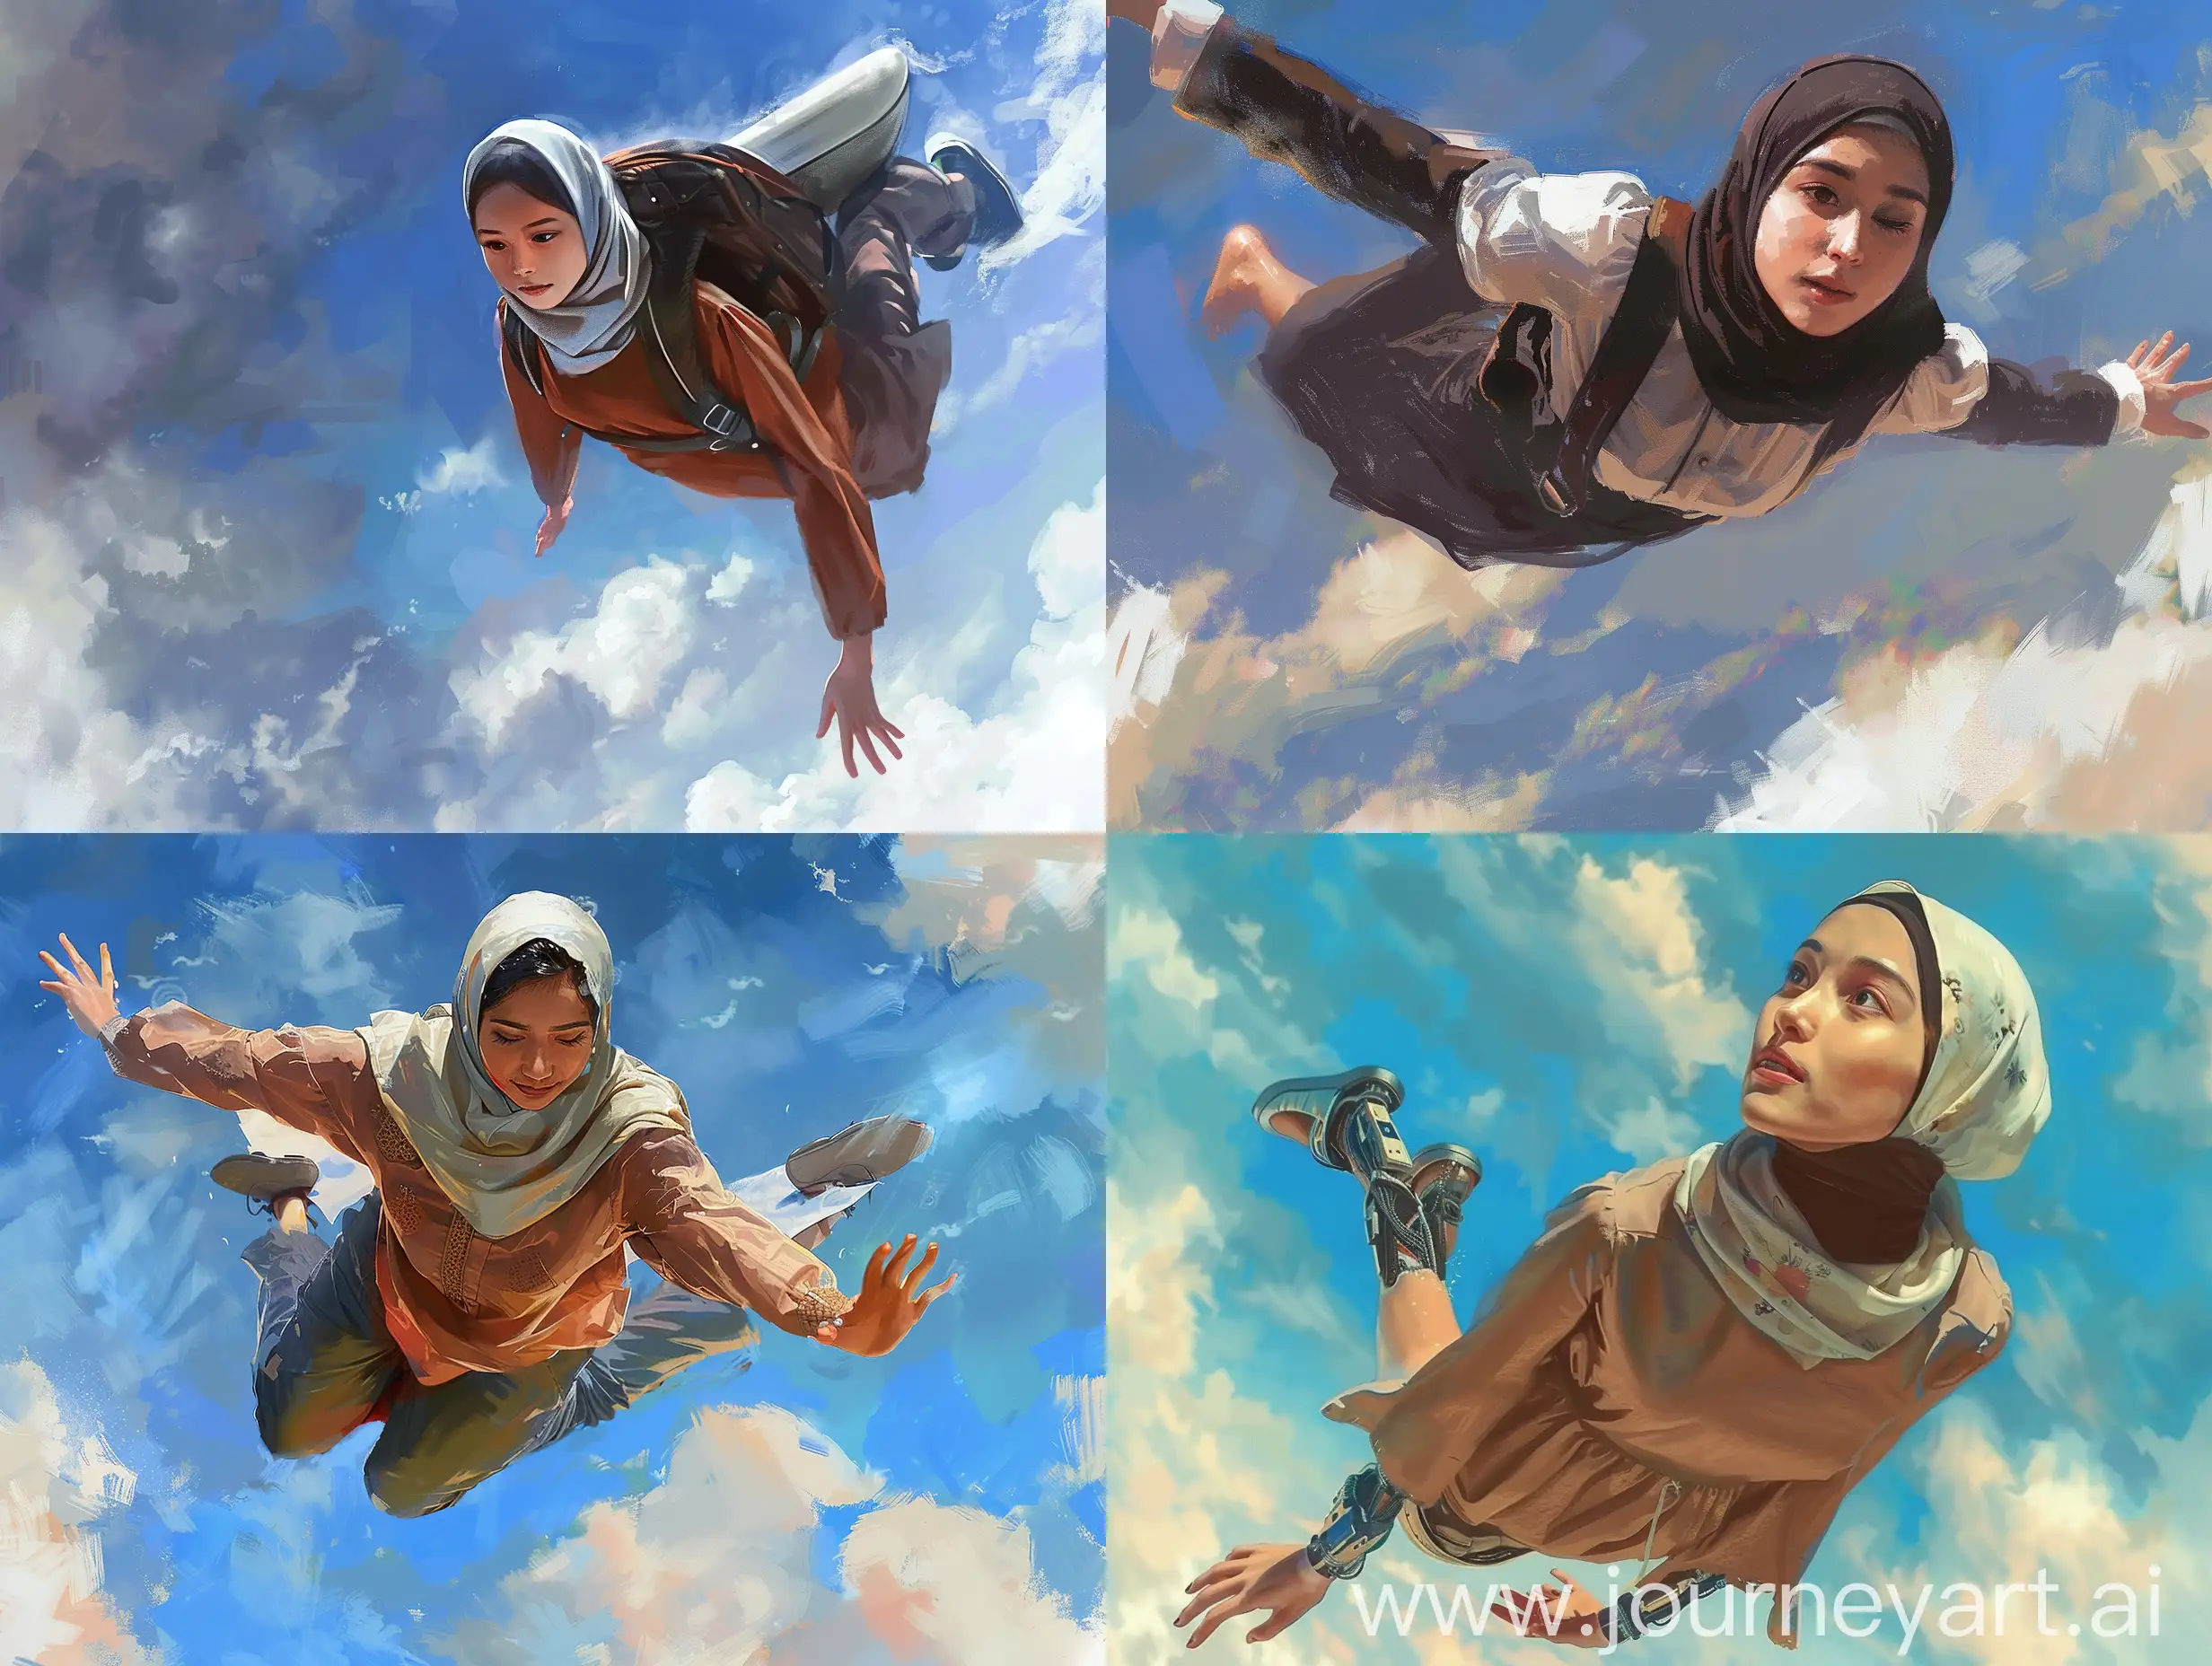 Indonesian-College-Female-Student-in-Hijab-Flying-with-Male-Companion-in-Sky